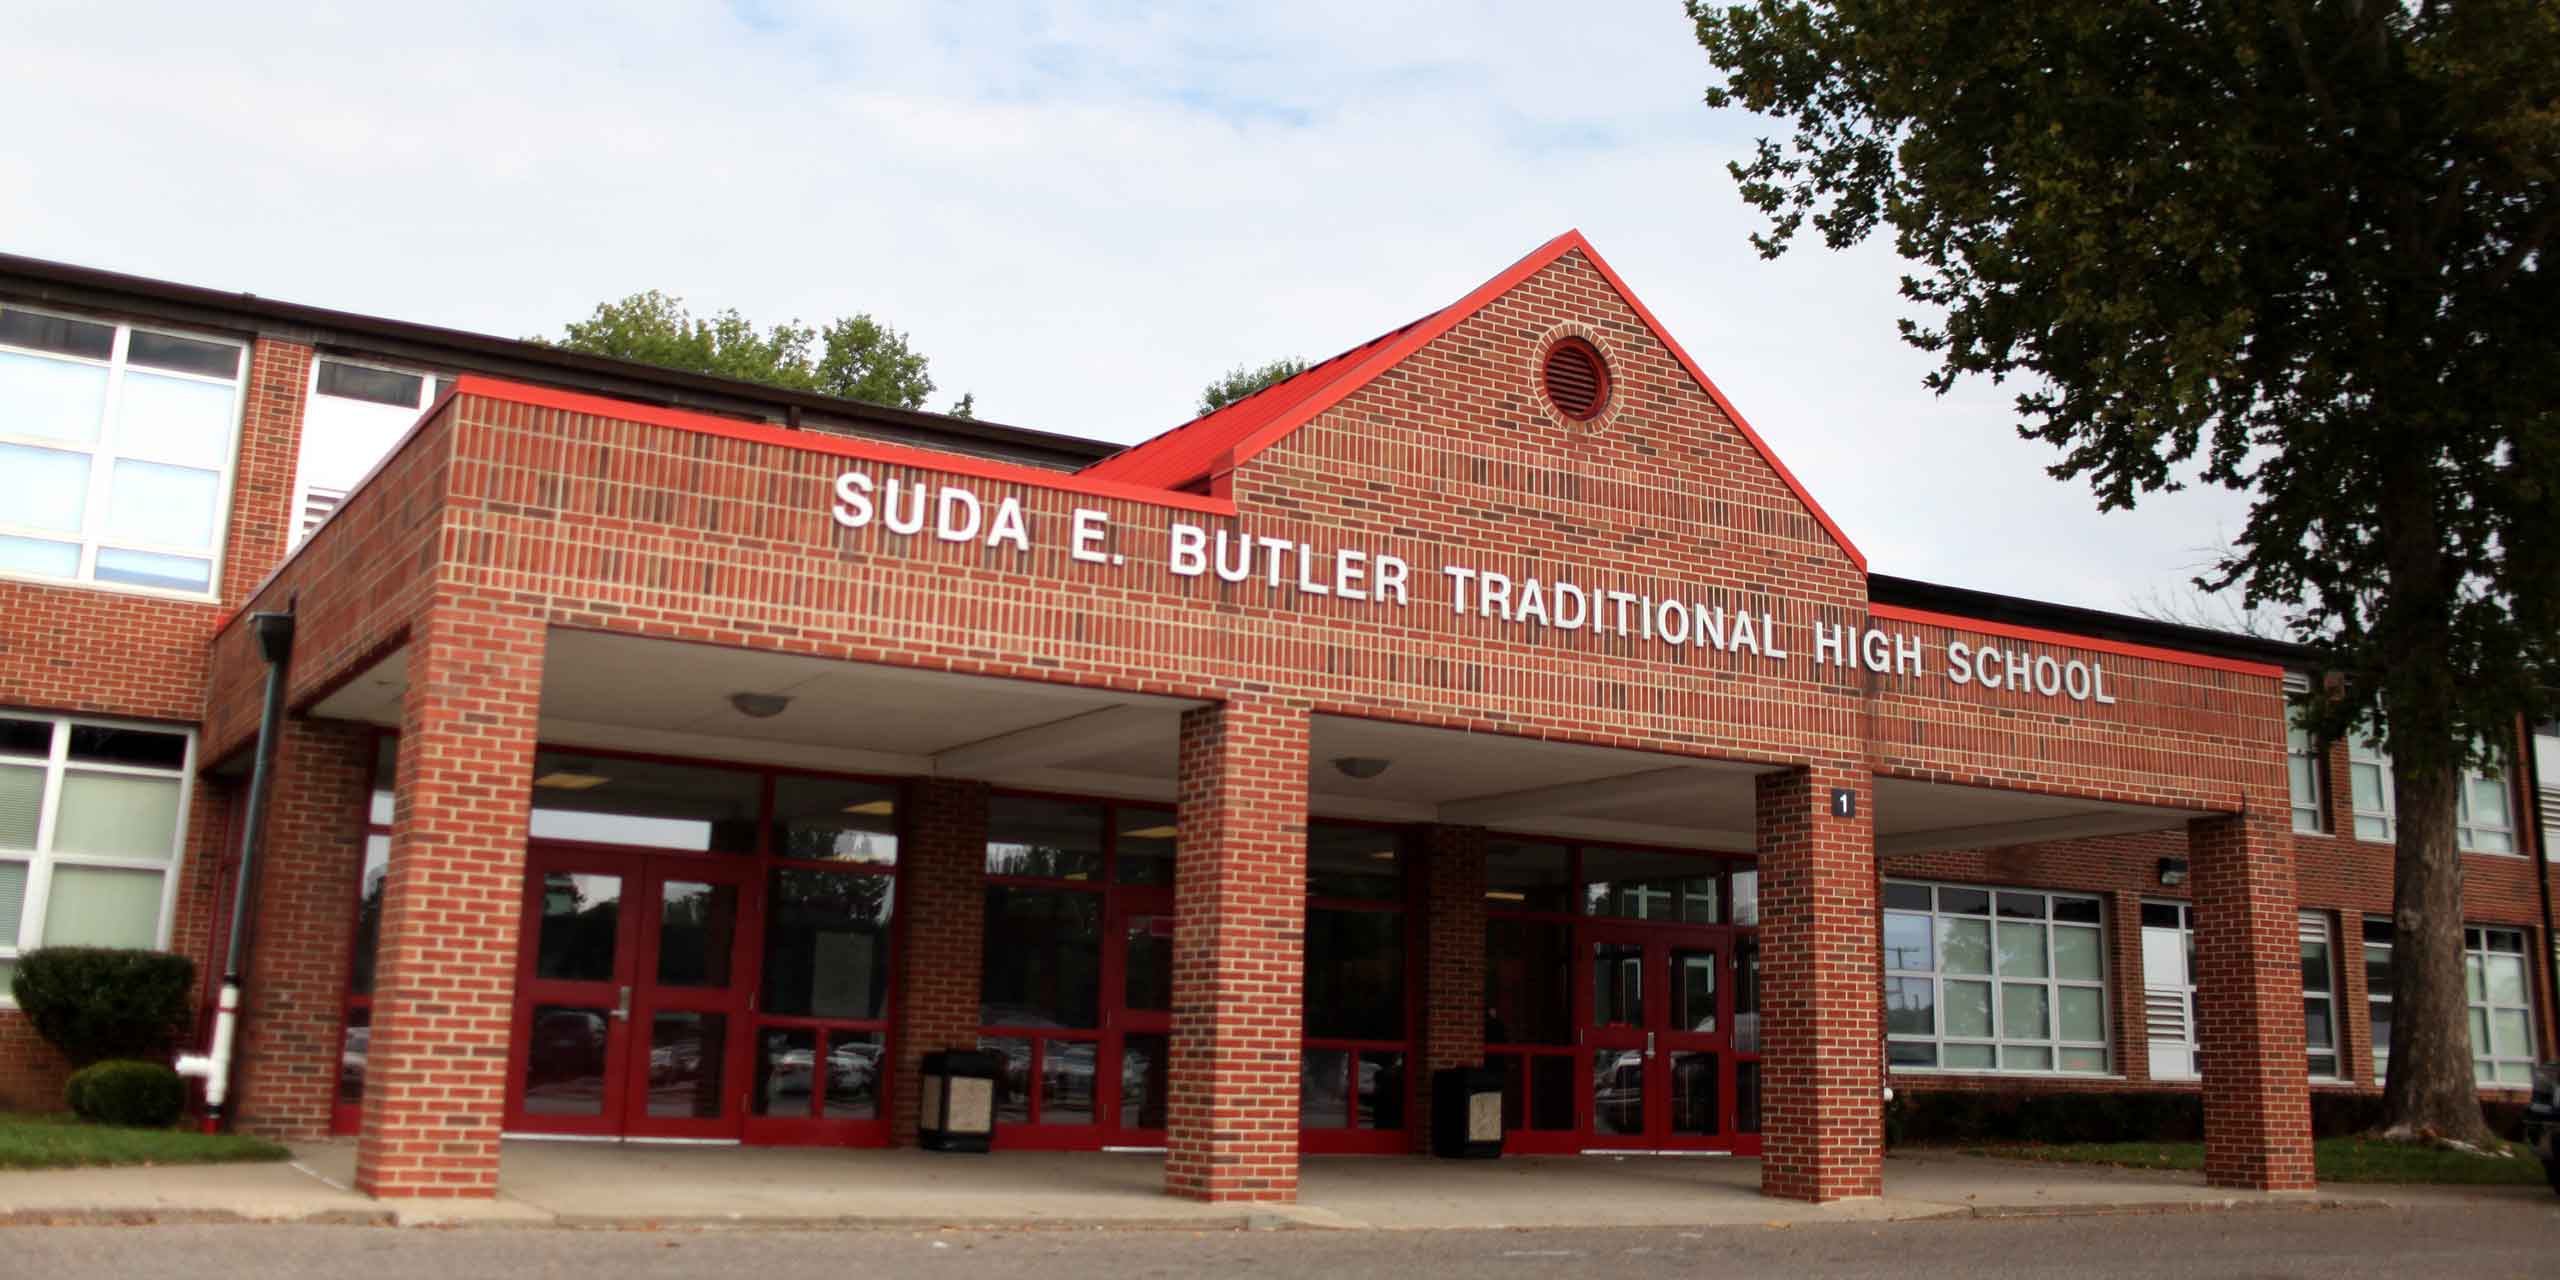 Home Butler Traditional High School